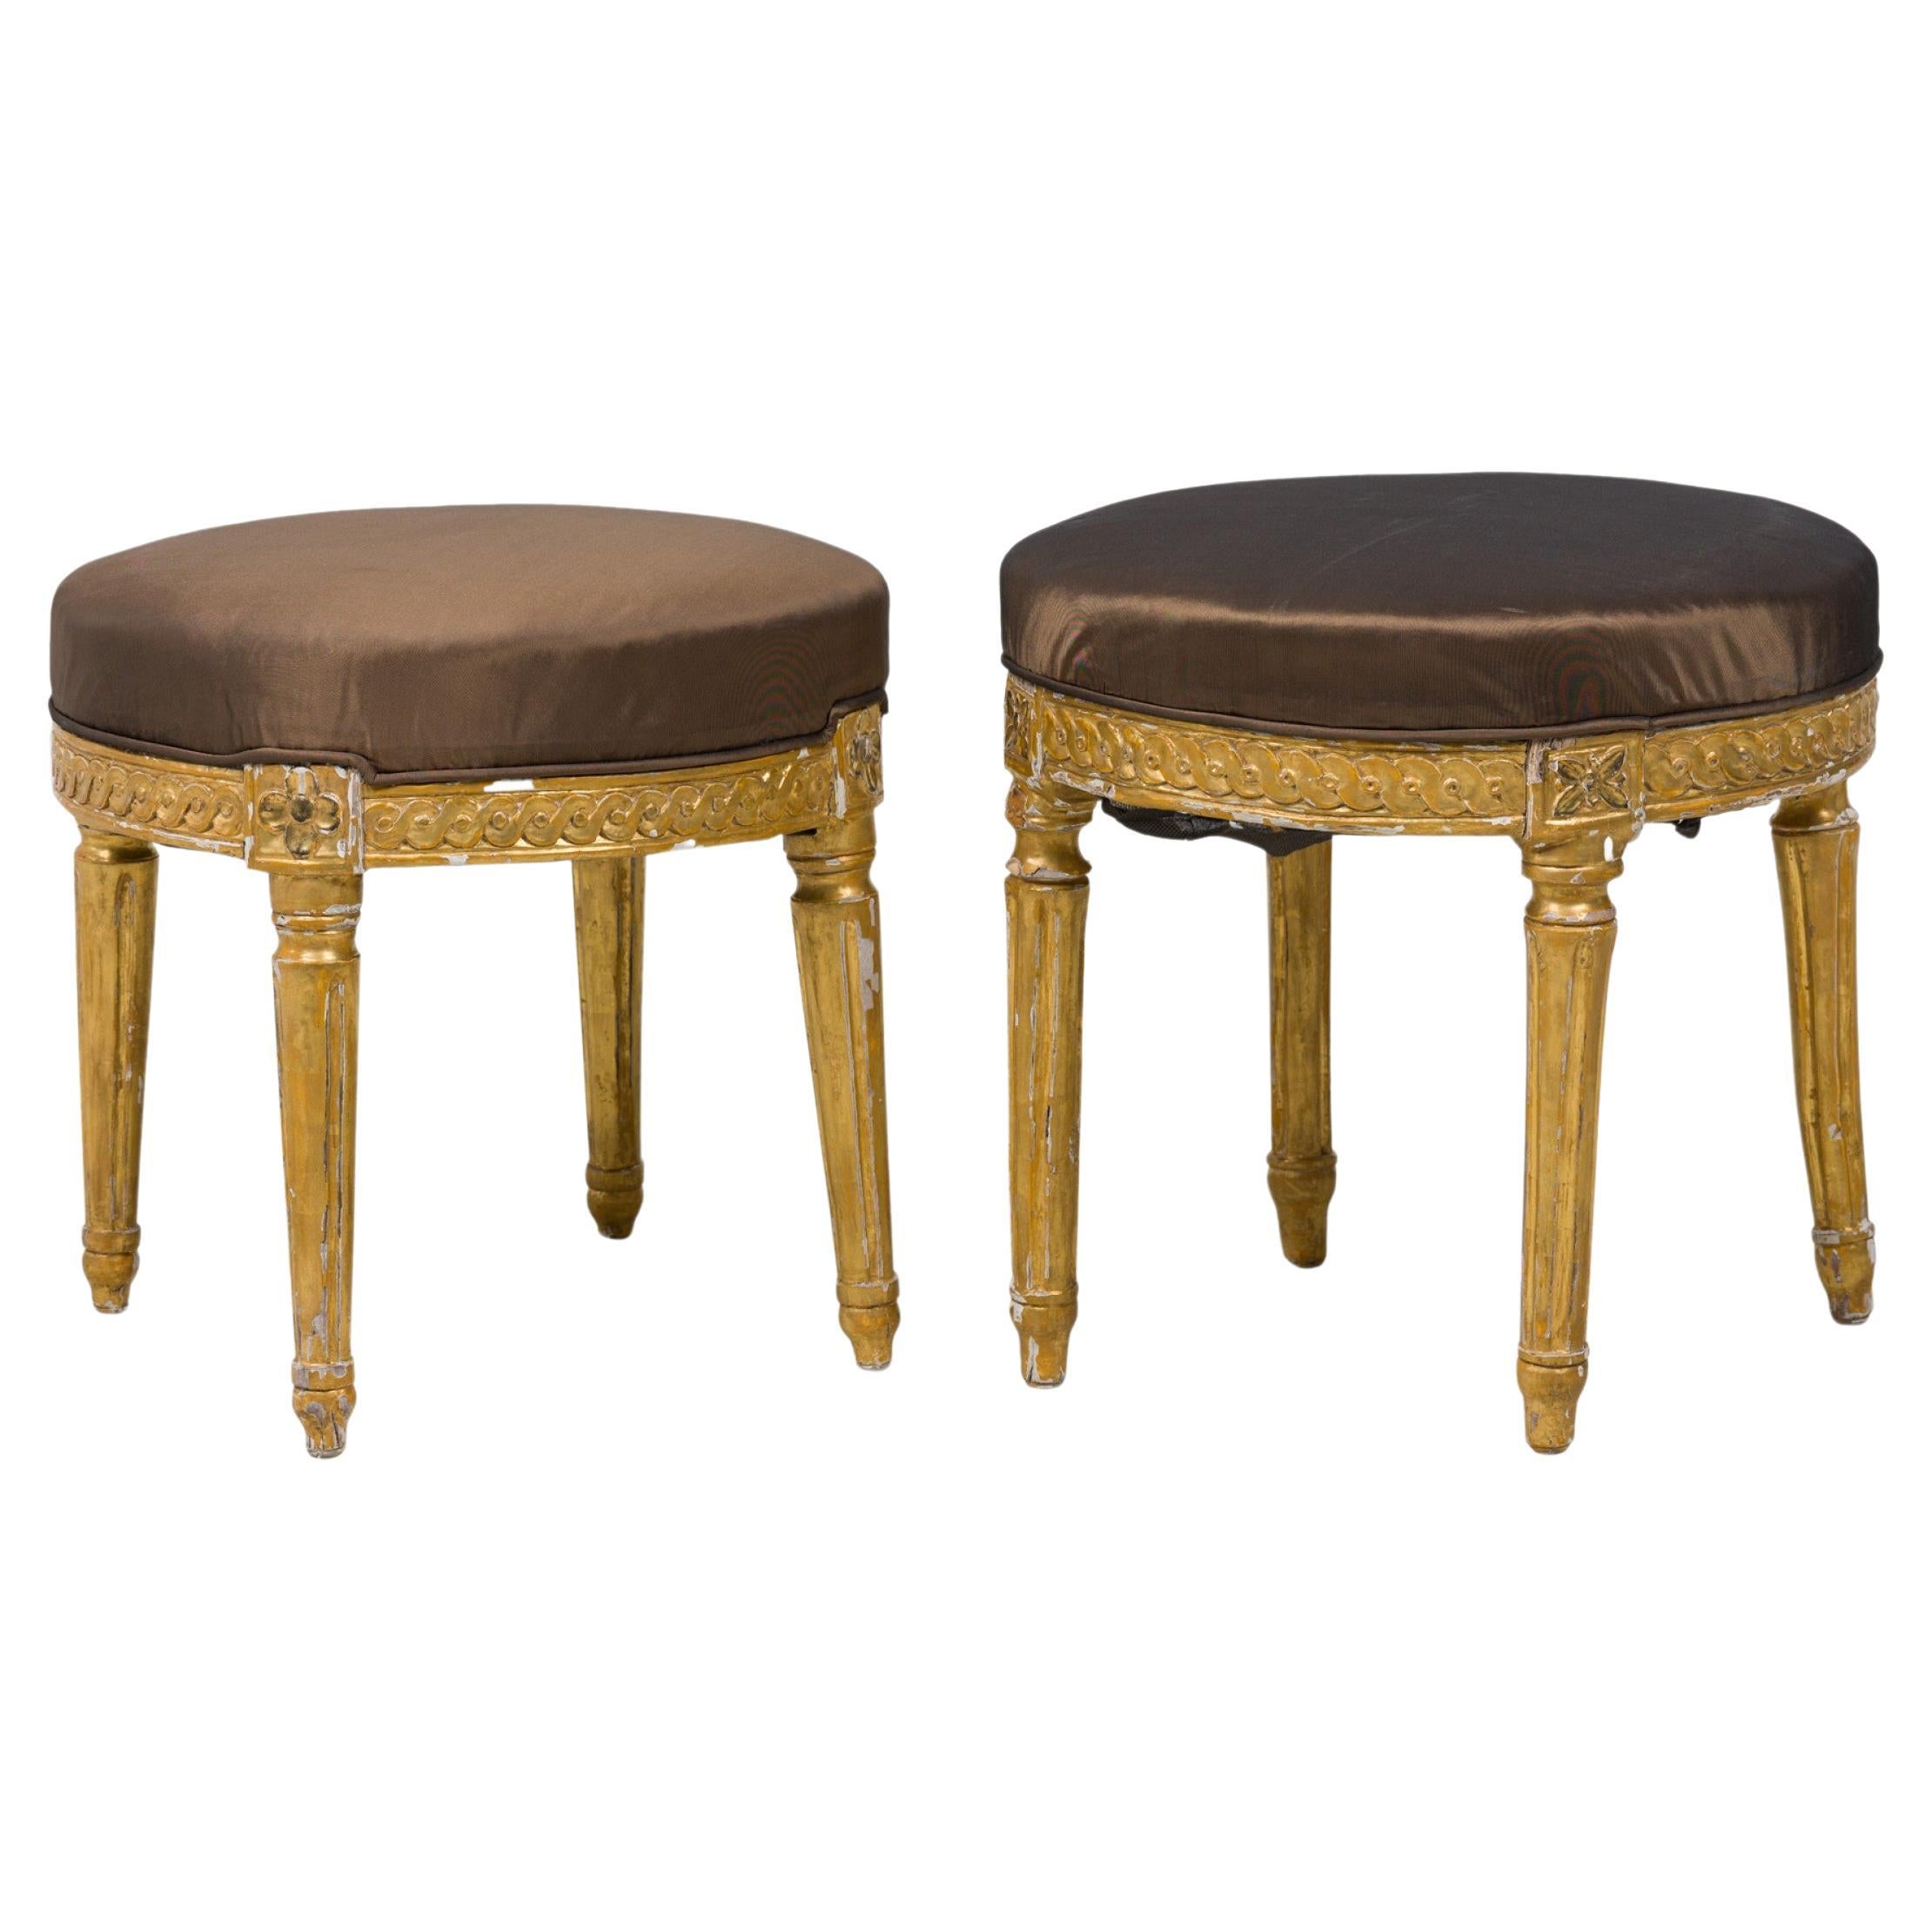 Pair of Italian Neo-Classic Giltwood Upholstered Taborets / Benches / Stools For Sale